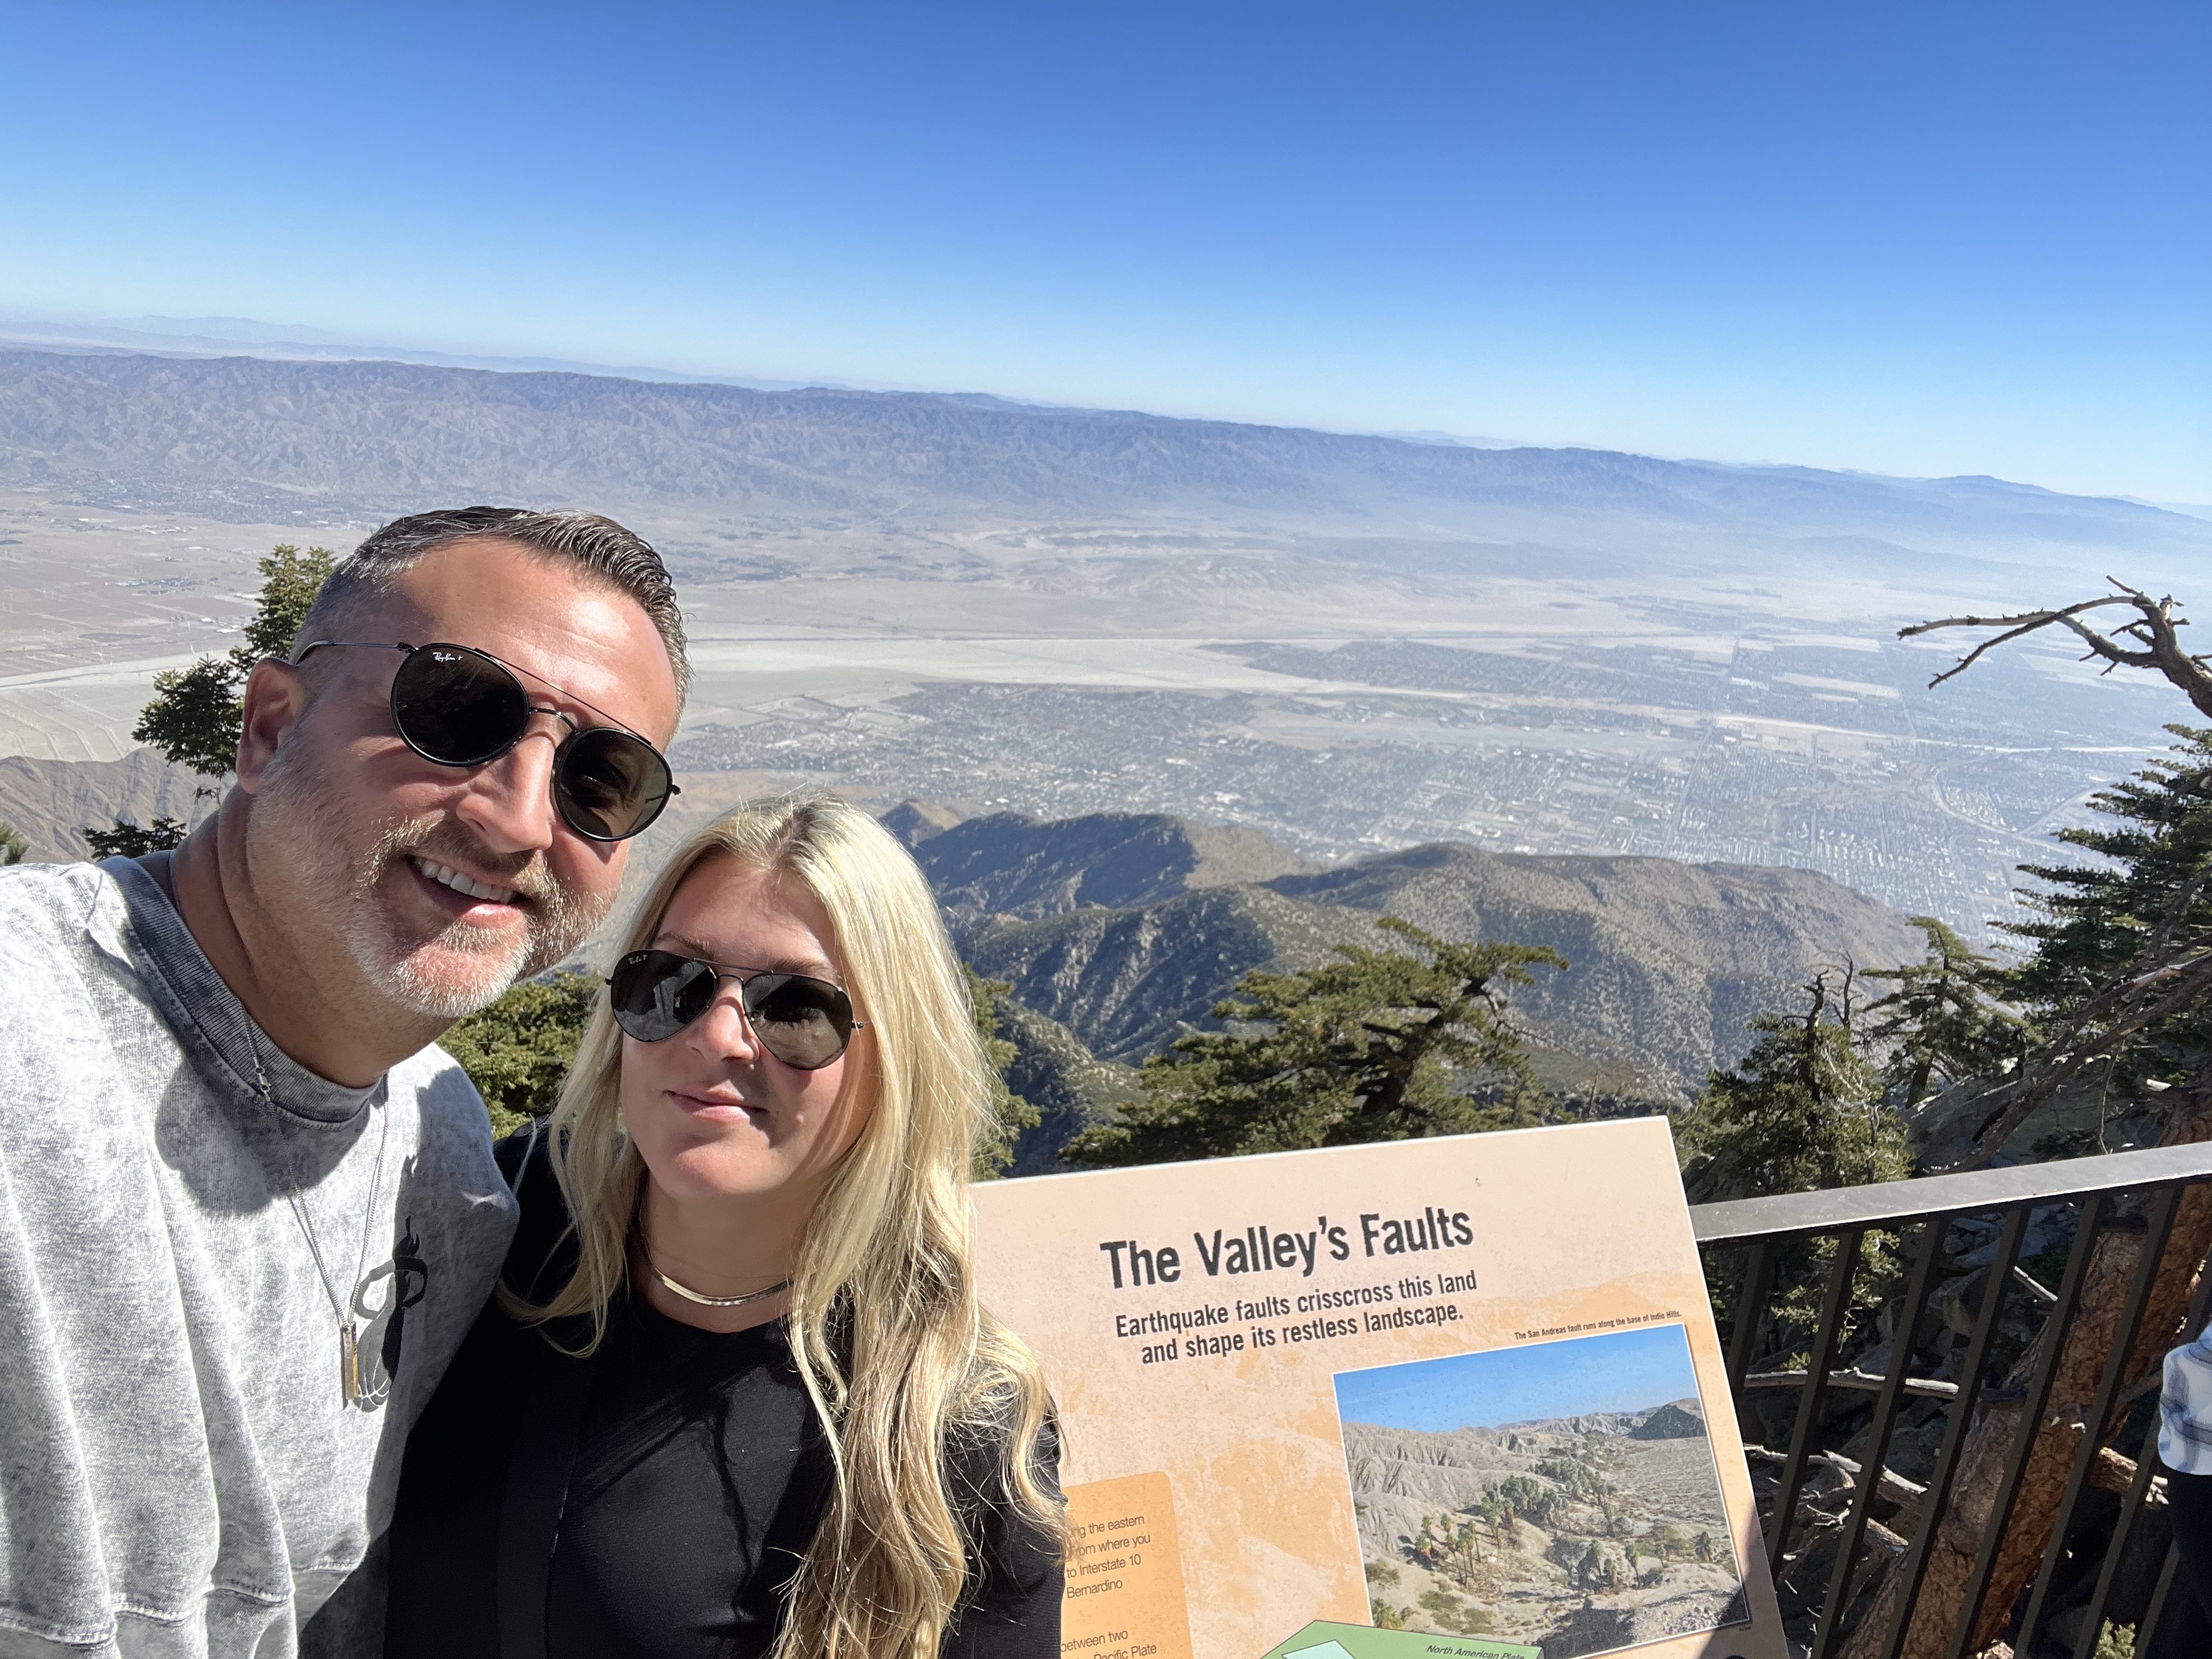 The Ultimate Guide To Palm Springs Aerial Tramway: A Must-Do Adventure